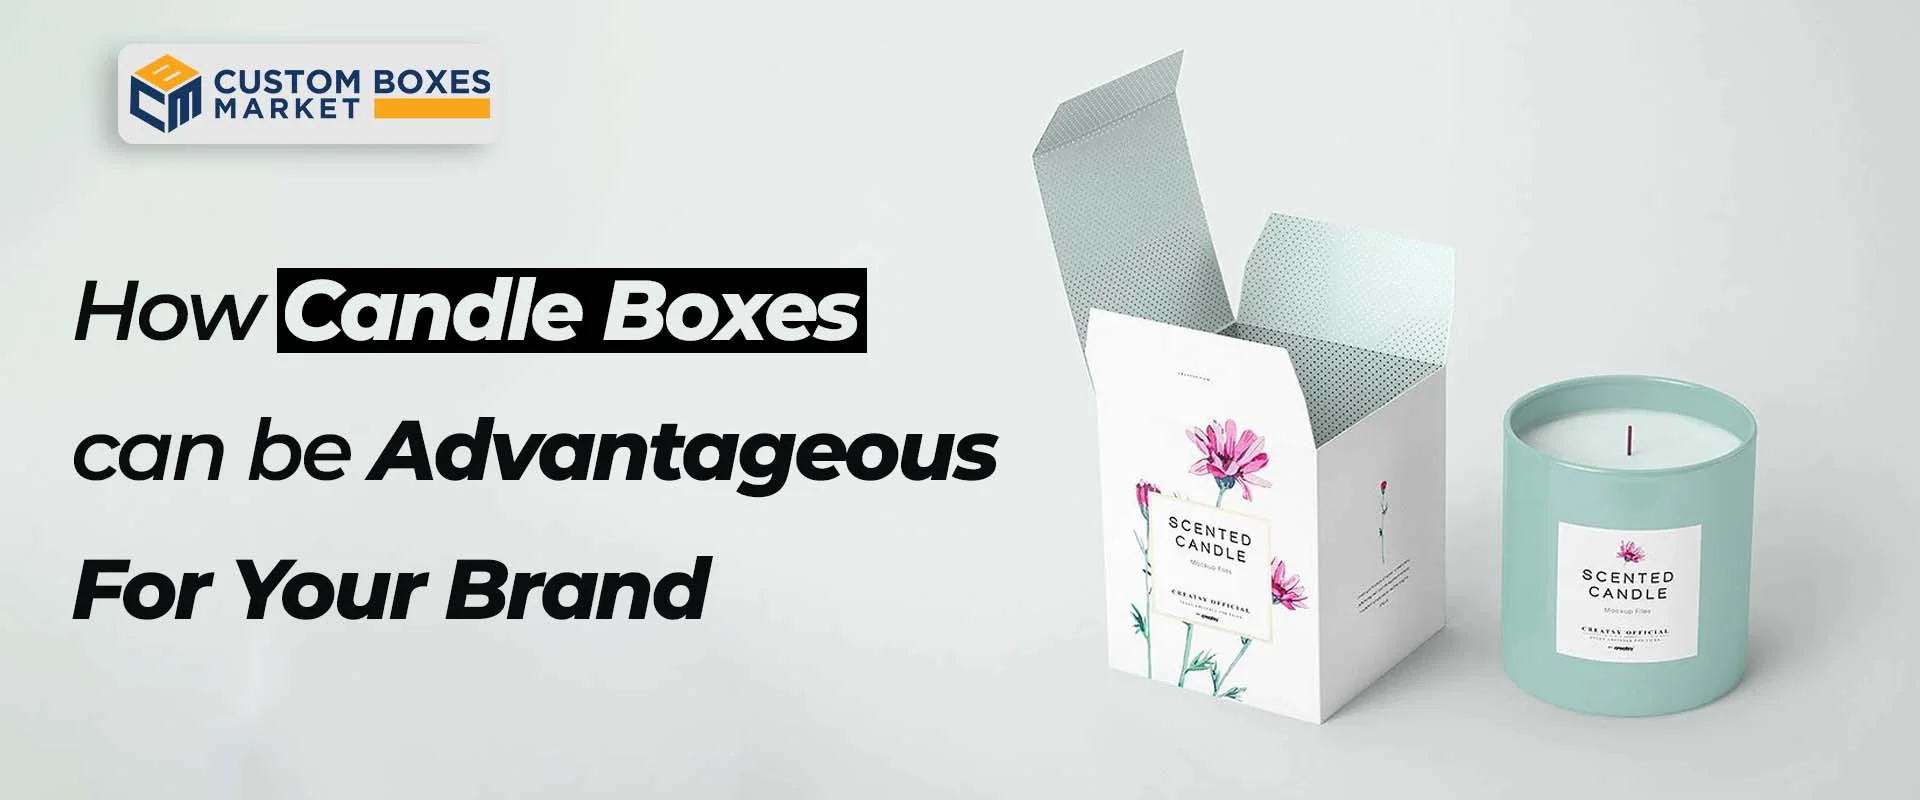 How Candle Boxes Can Be Advantageous For Your Brand